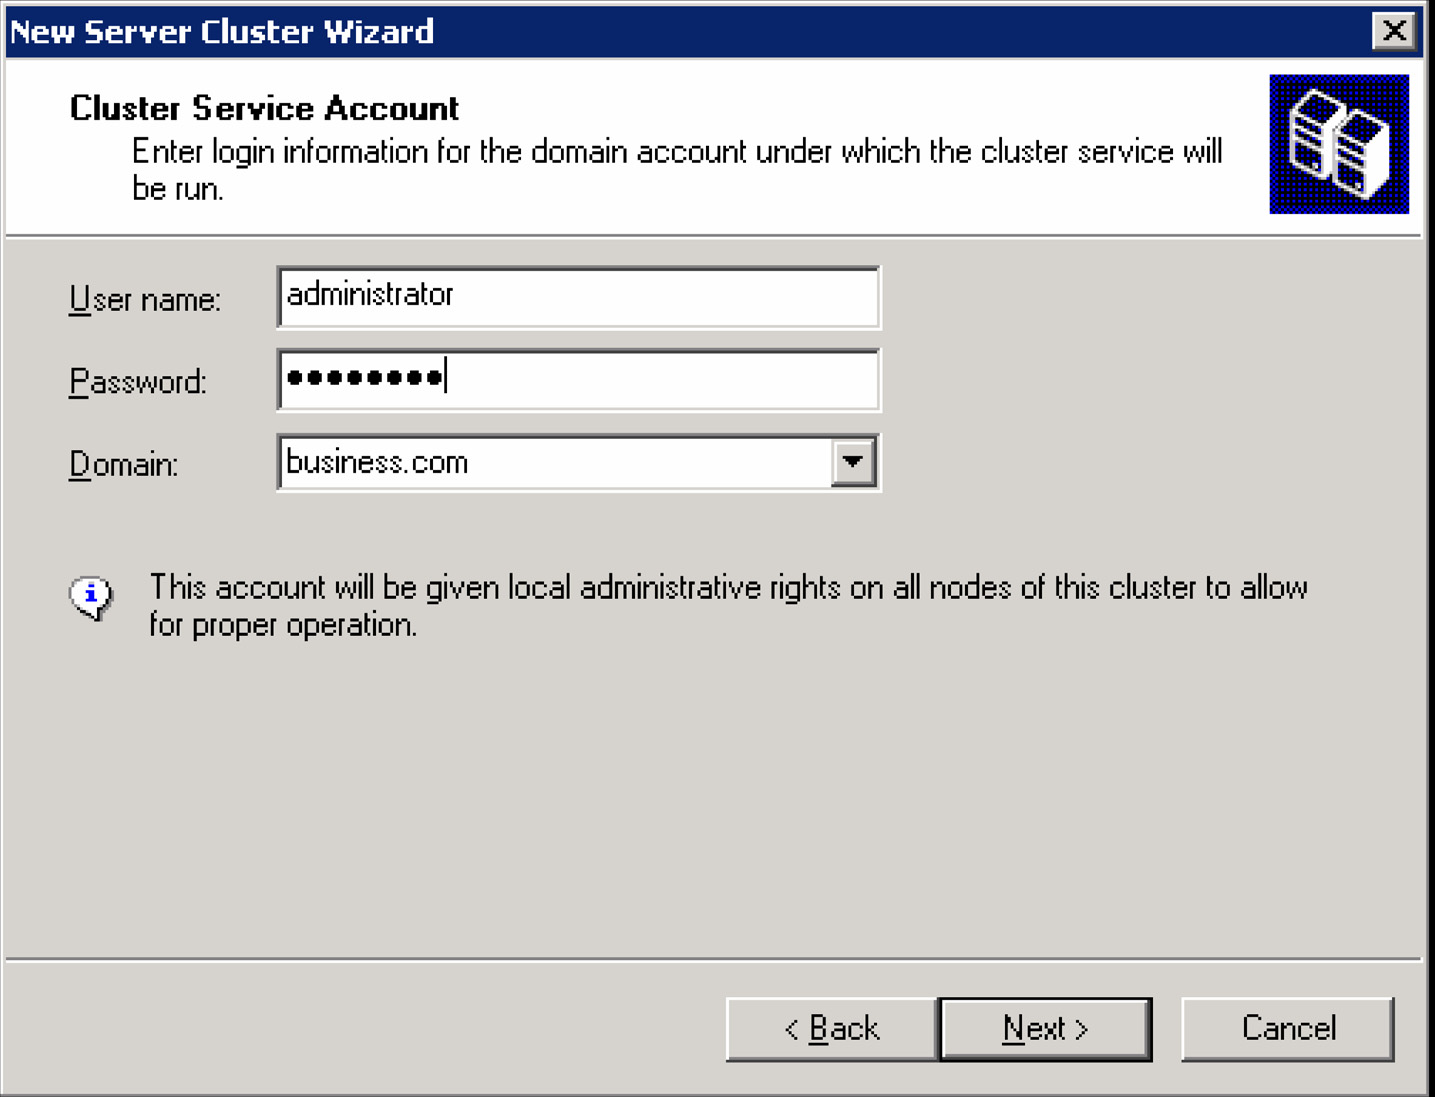 7 Next enter the User Name and Password for the cluster administrator.